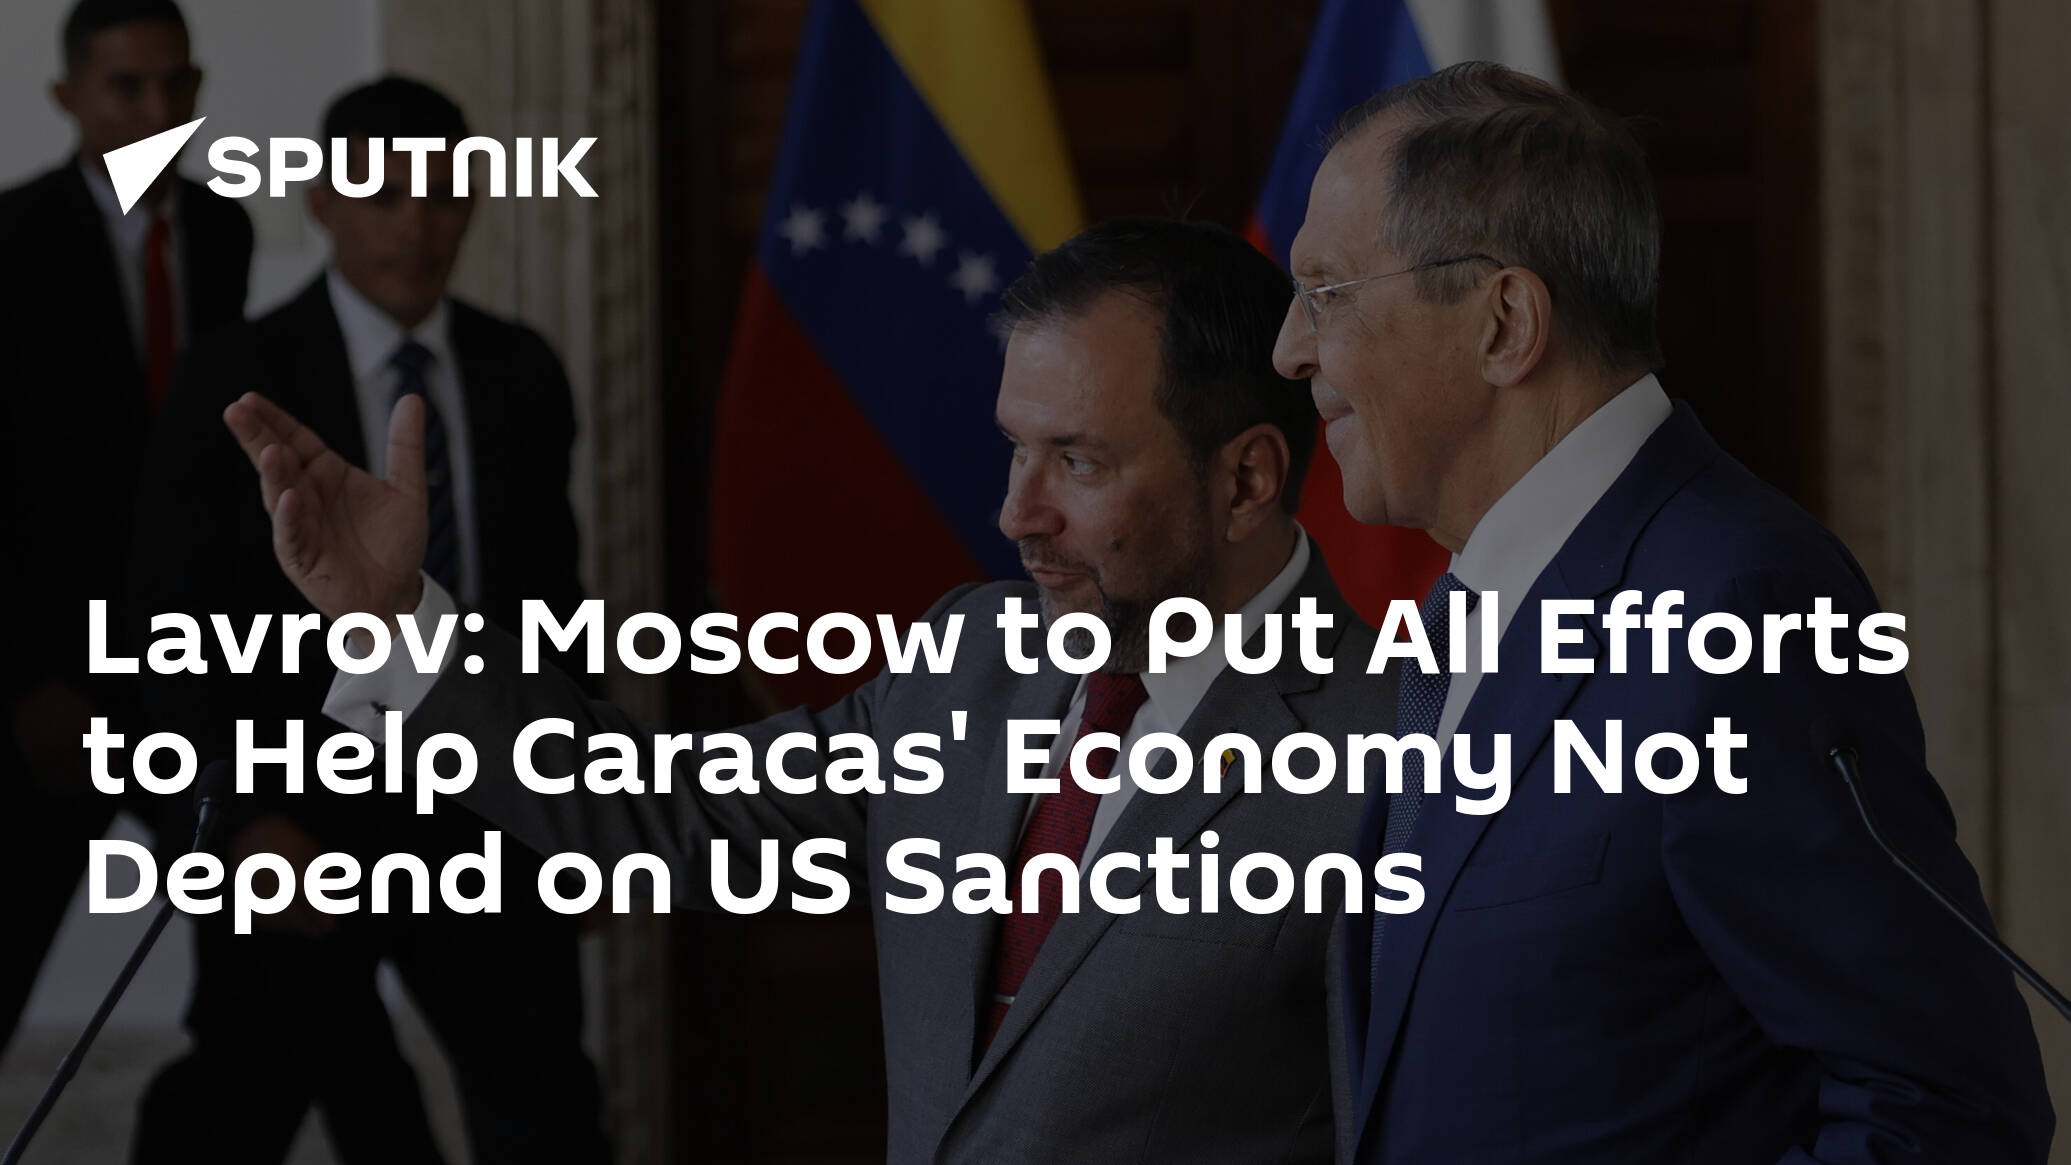 Lavrov: Moscow to Put All Efforts to Help Caracas' Economy Not Depend on US Sanctions